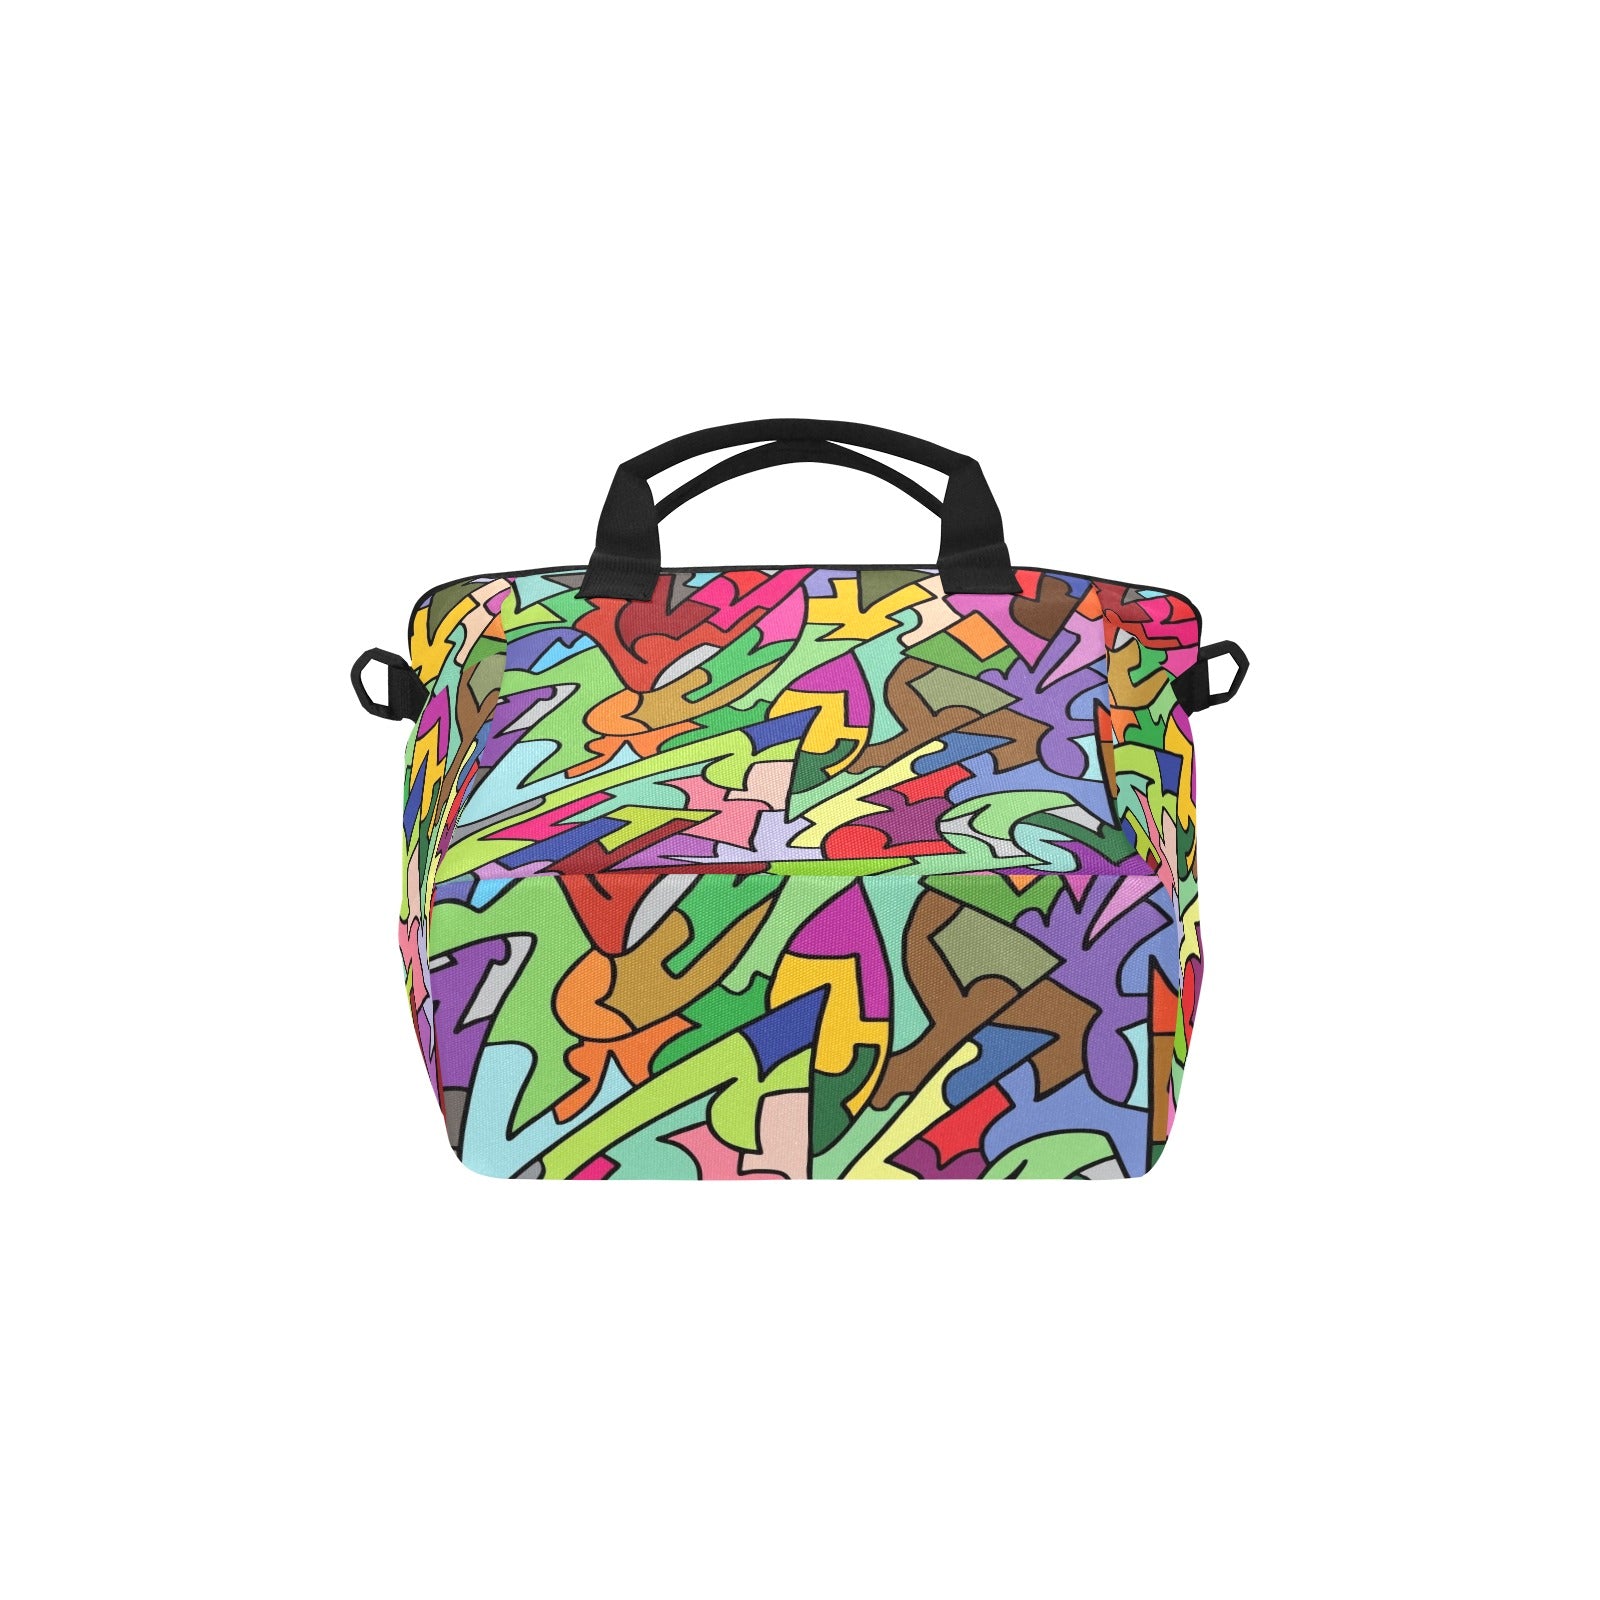 Bright Abstract - Tote Bag with Shoulder Strap Nylon Tote Bag